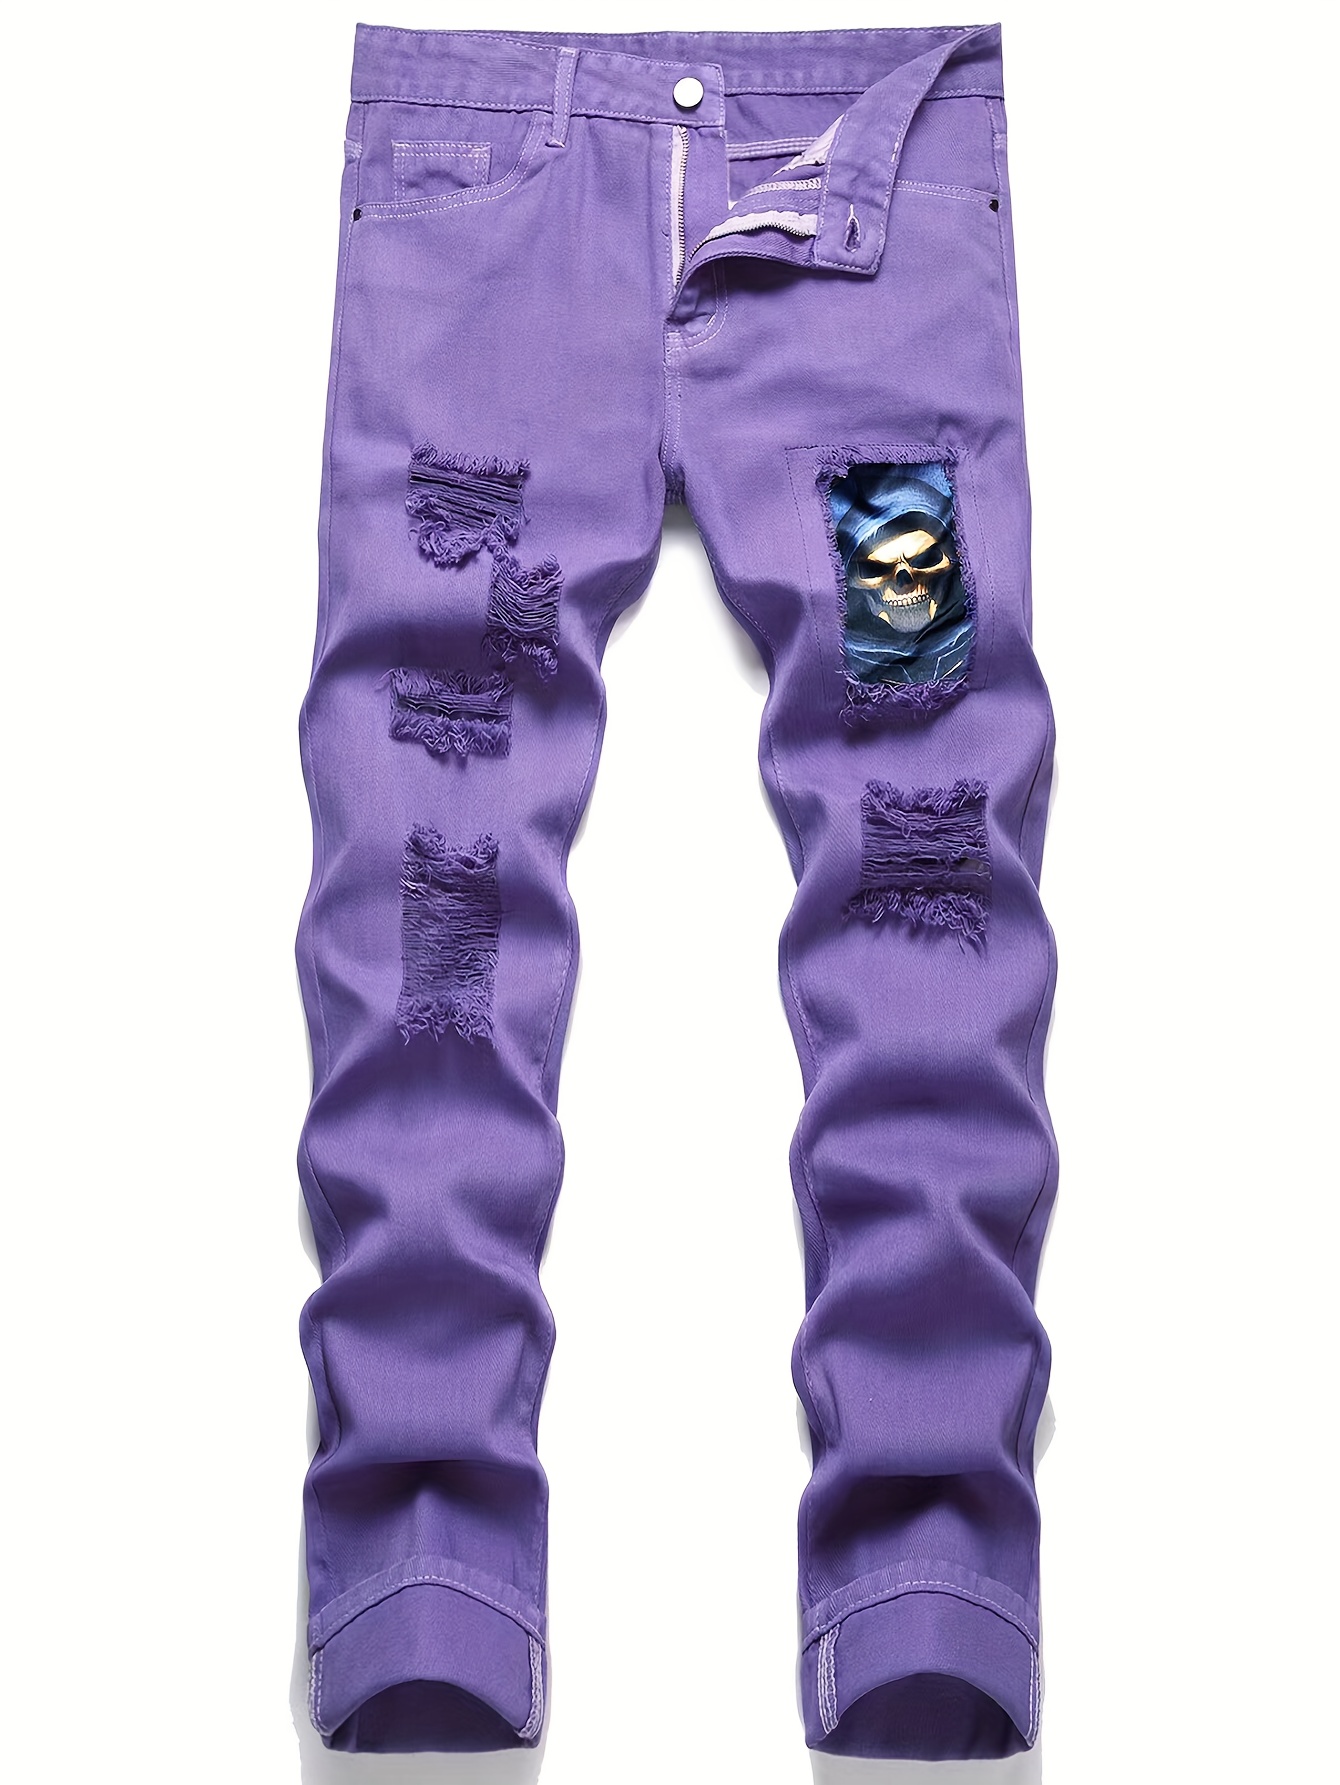 Purple Pants Outfits For Men (148 ideas & outfits)